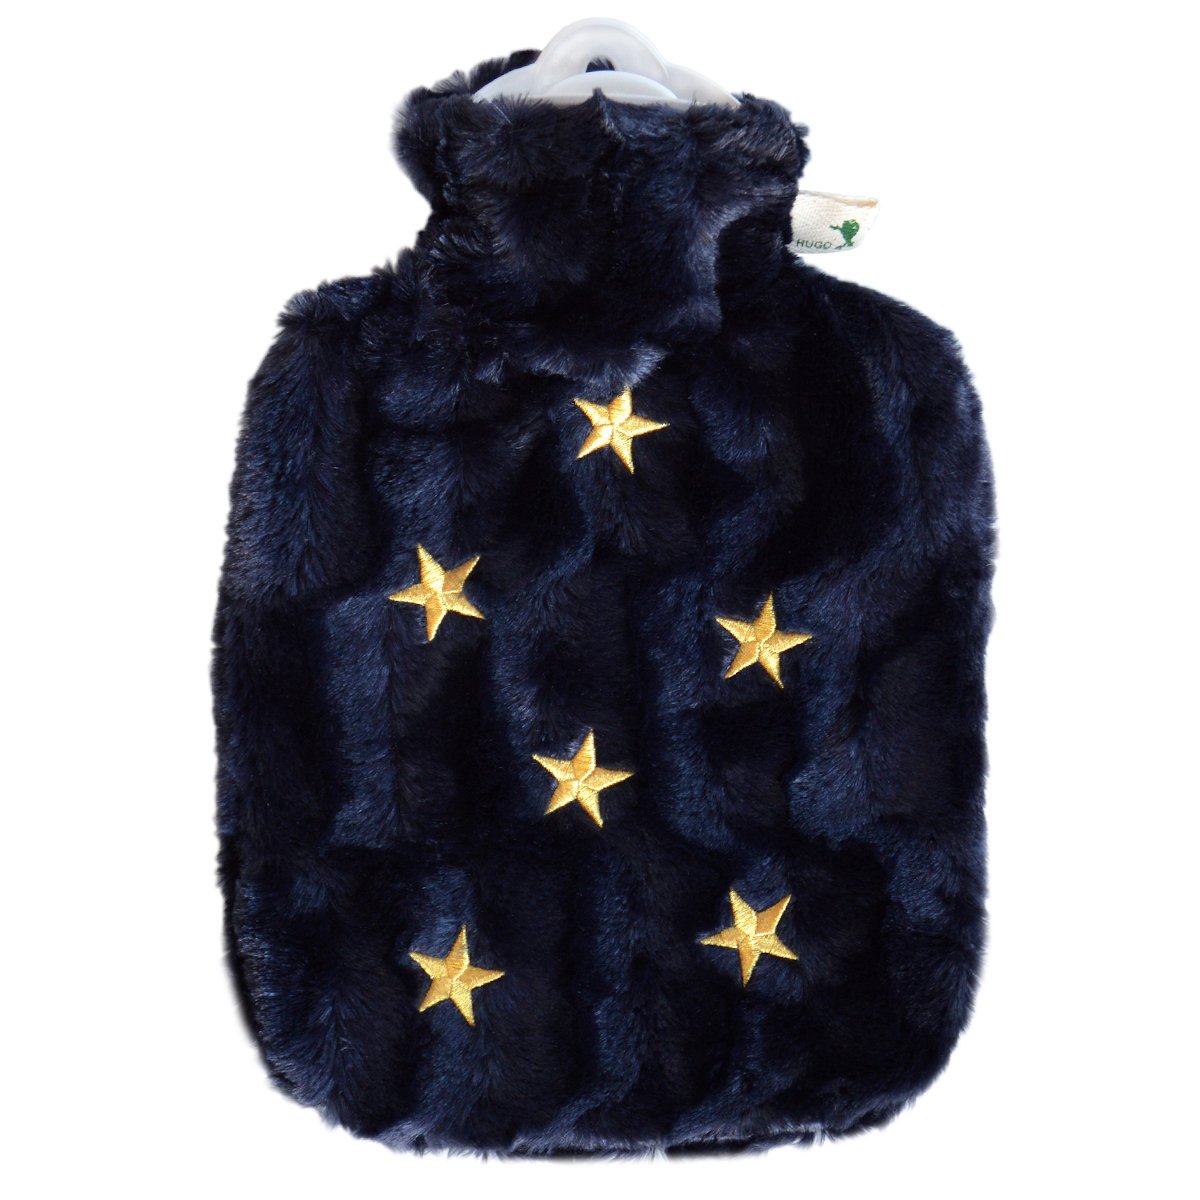 Hot Water Bottle Classic with Cover, Faux Fur - Dark Blue Stars